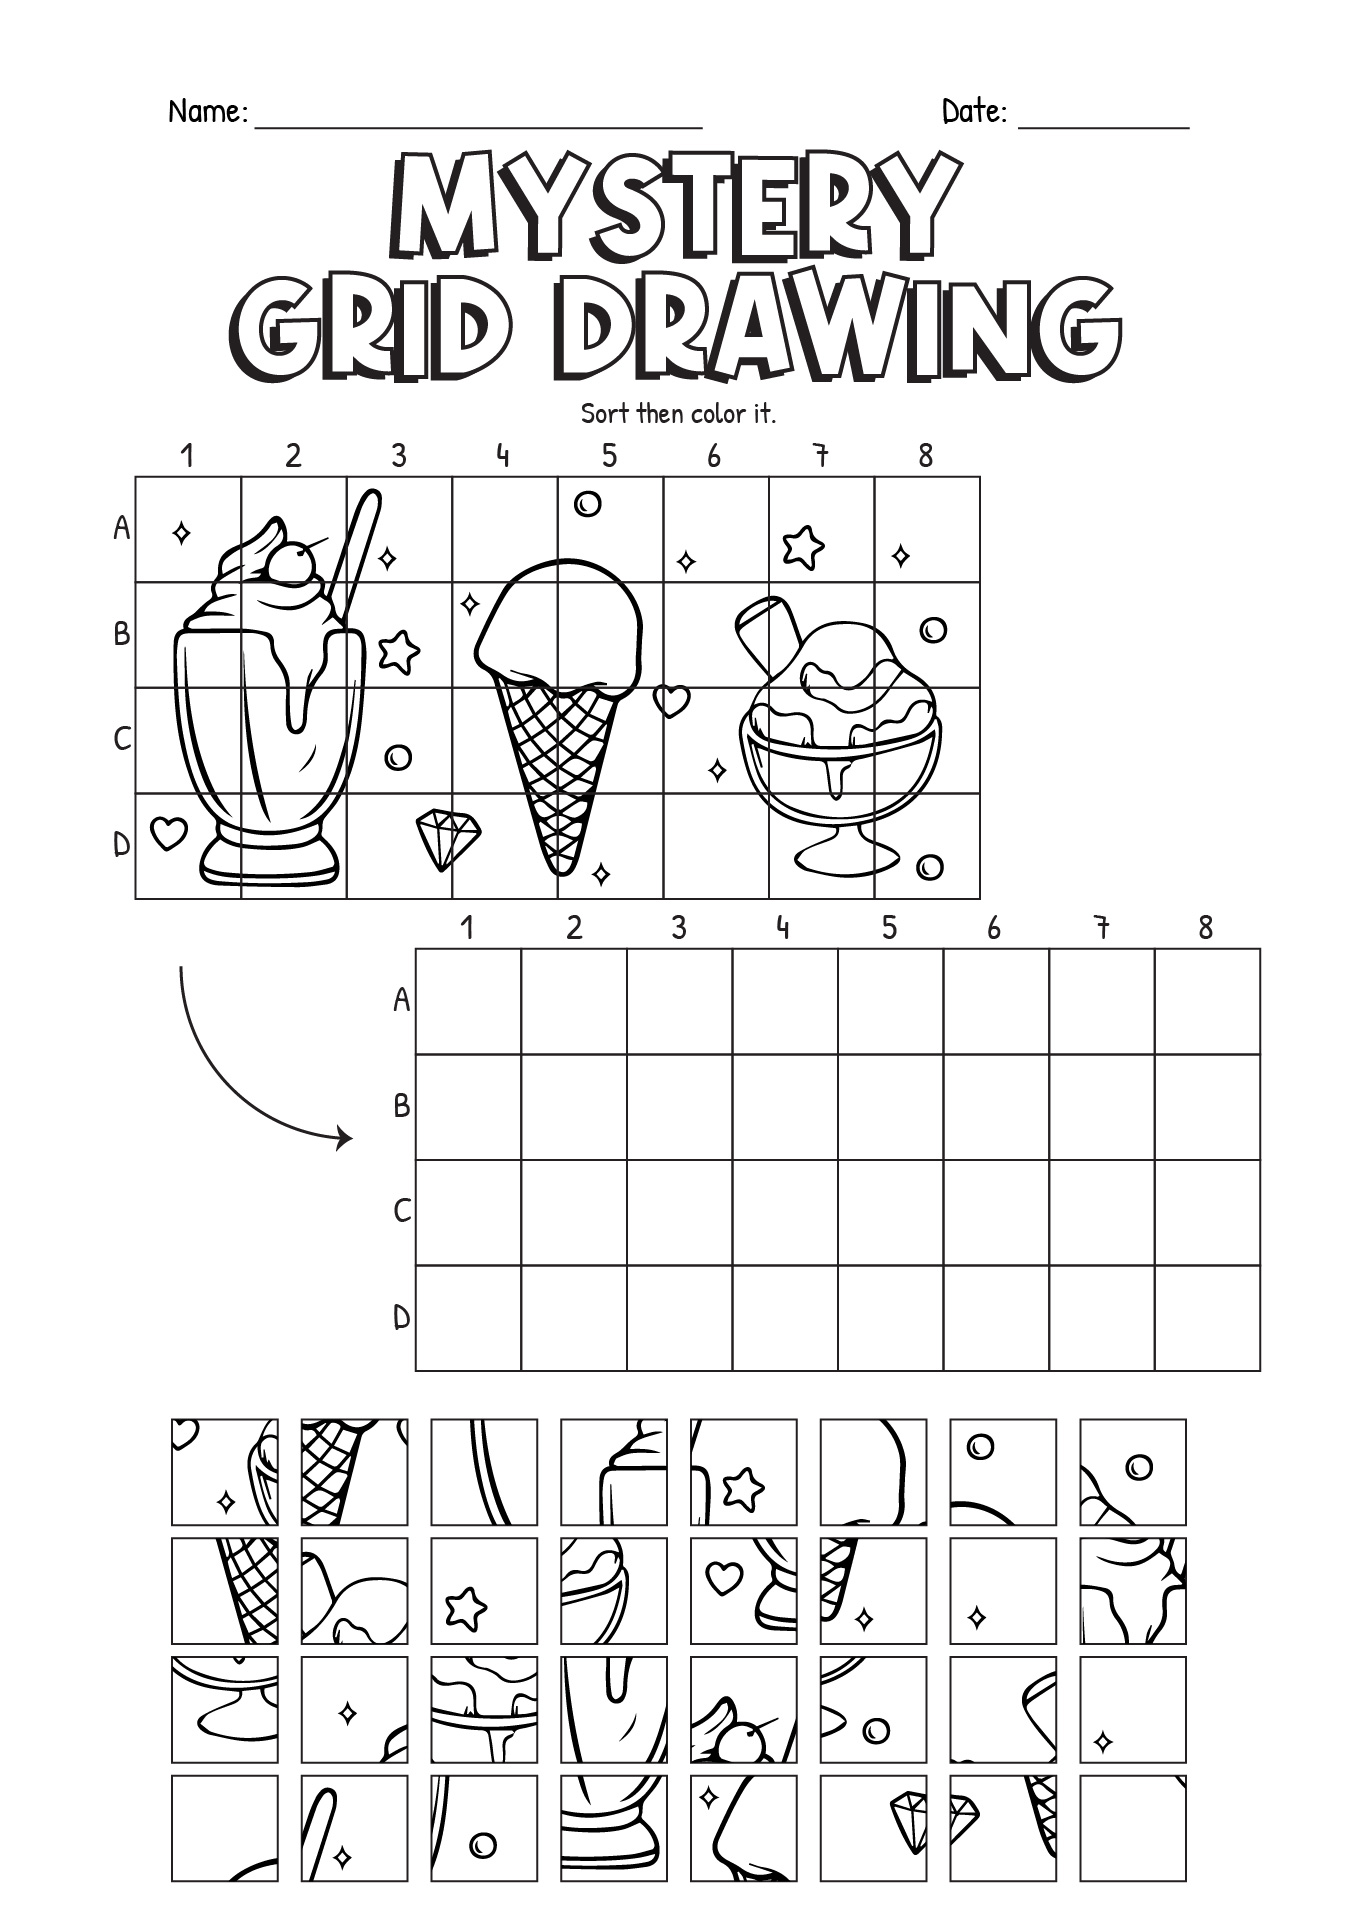 9 Best Images of Printable Mystery Grid Drawing Worksheets